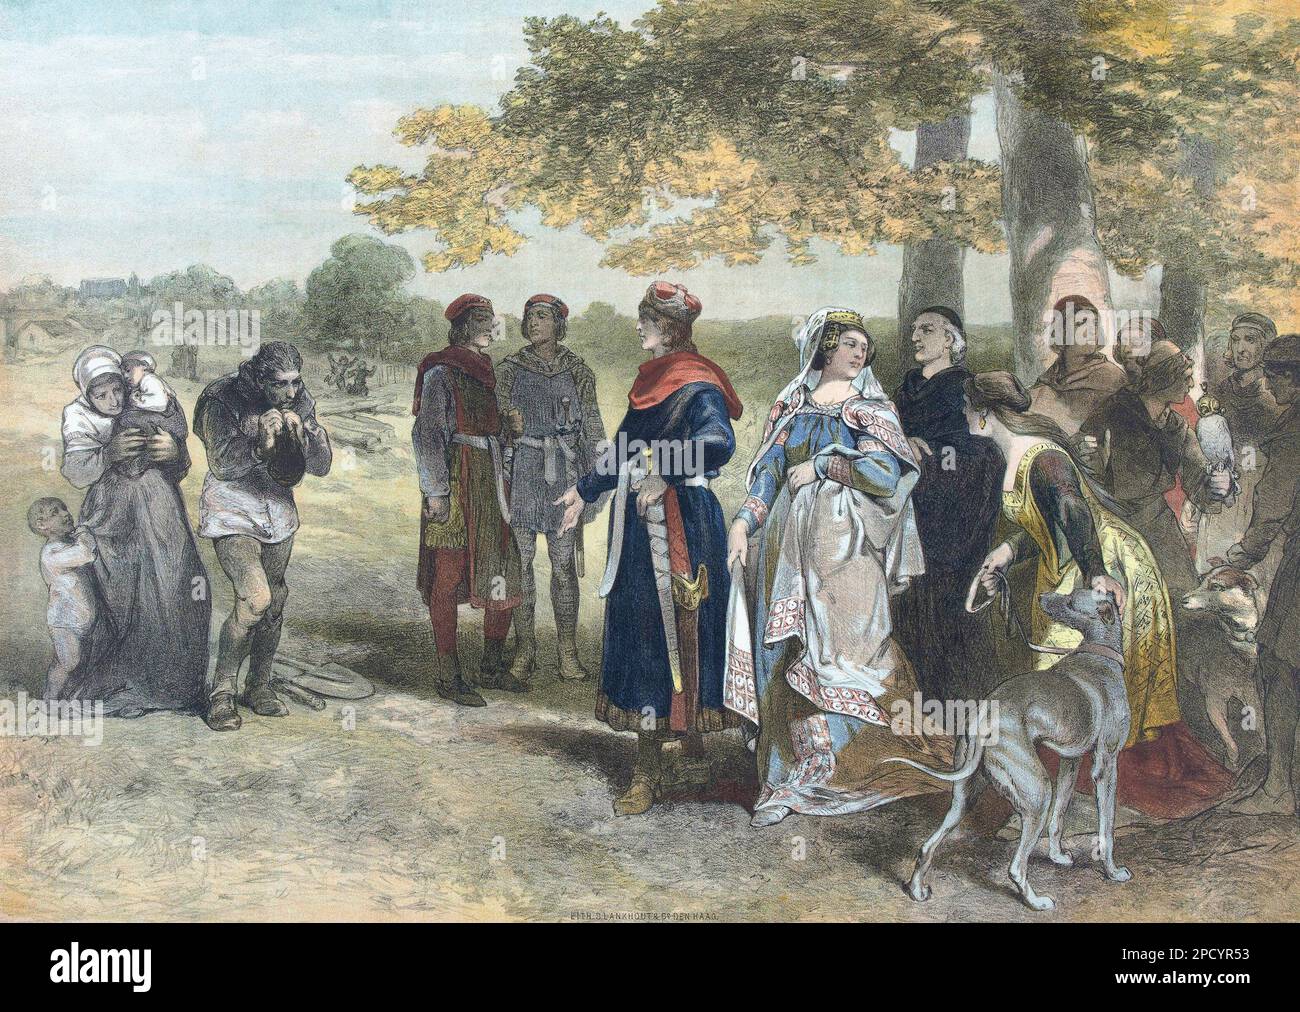 Floris V, Count of Holland and Zeeland, 1256 - 1296, with his wife Beatrice of Flanders and his nobles are approached by a peasant family while walking in the woods.  Legend has it that Foris was nicknamed the God of the Peasants.  After a work by Charles Rochussen. Stock Photo